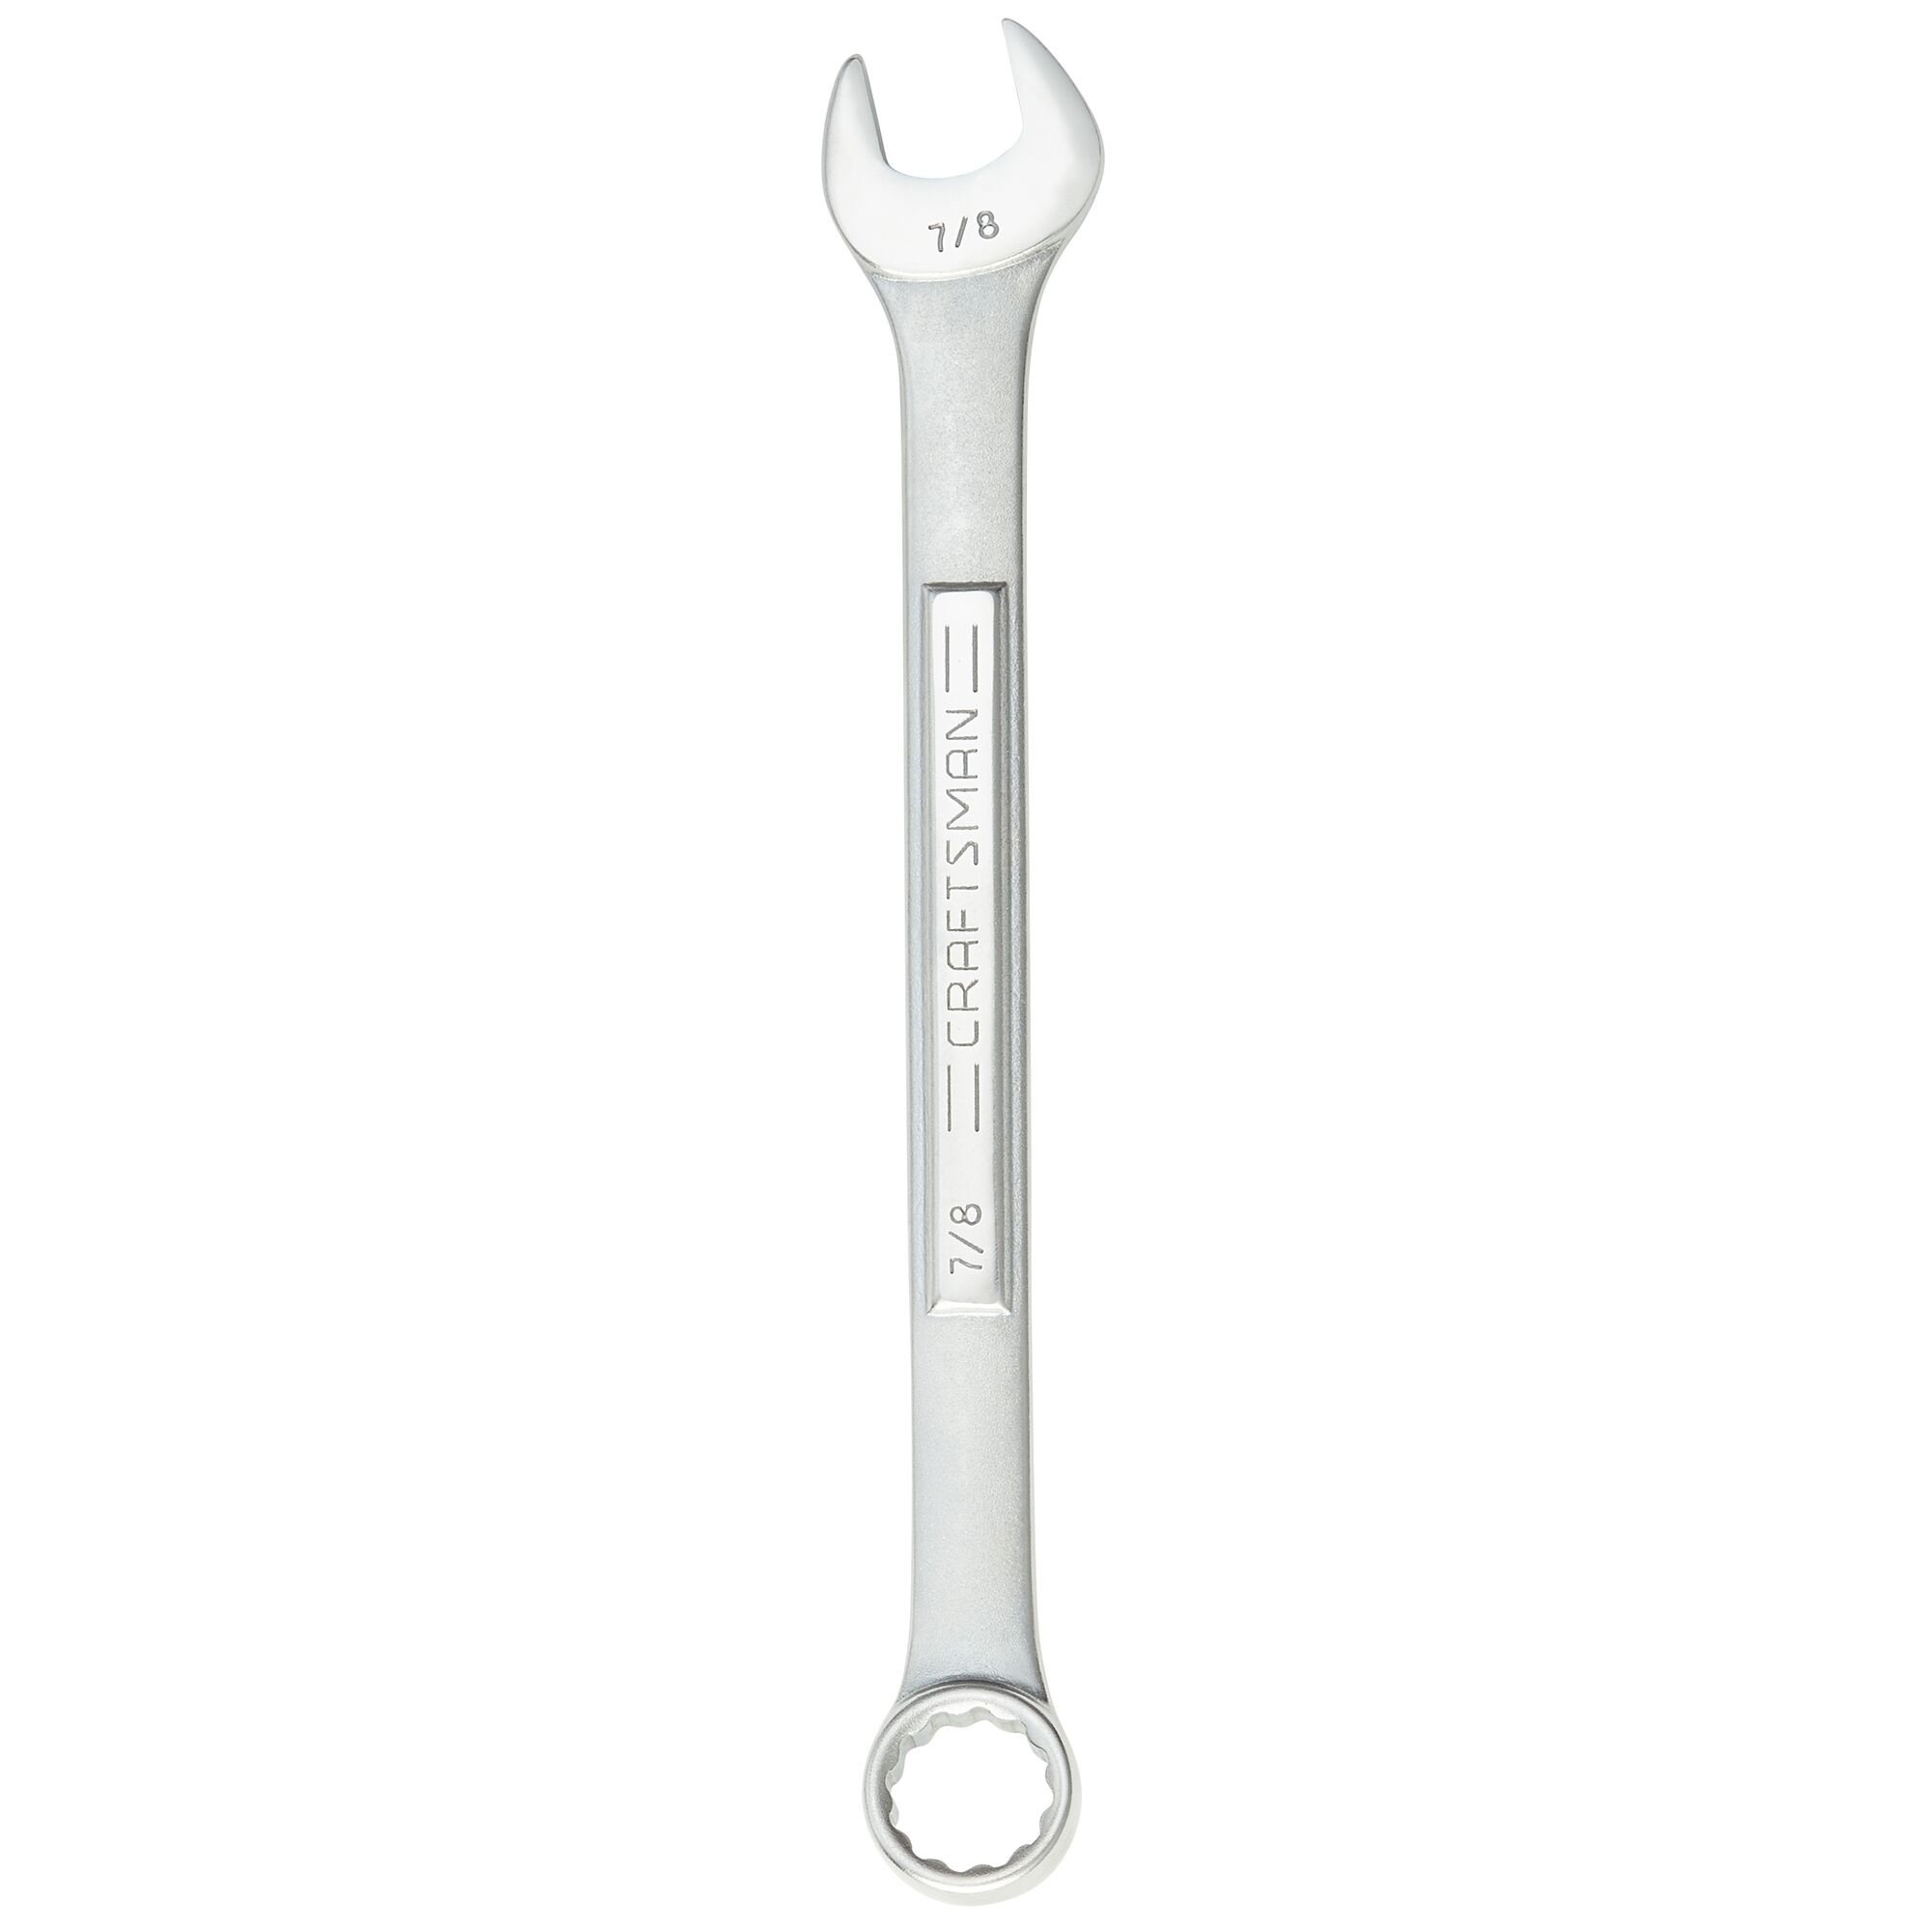 Front view of Craftsman 12 pt. Wrench.